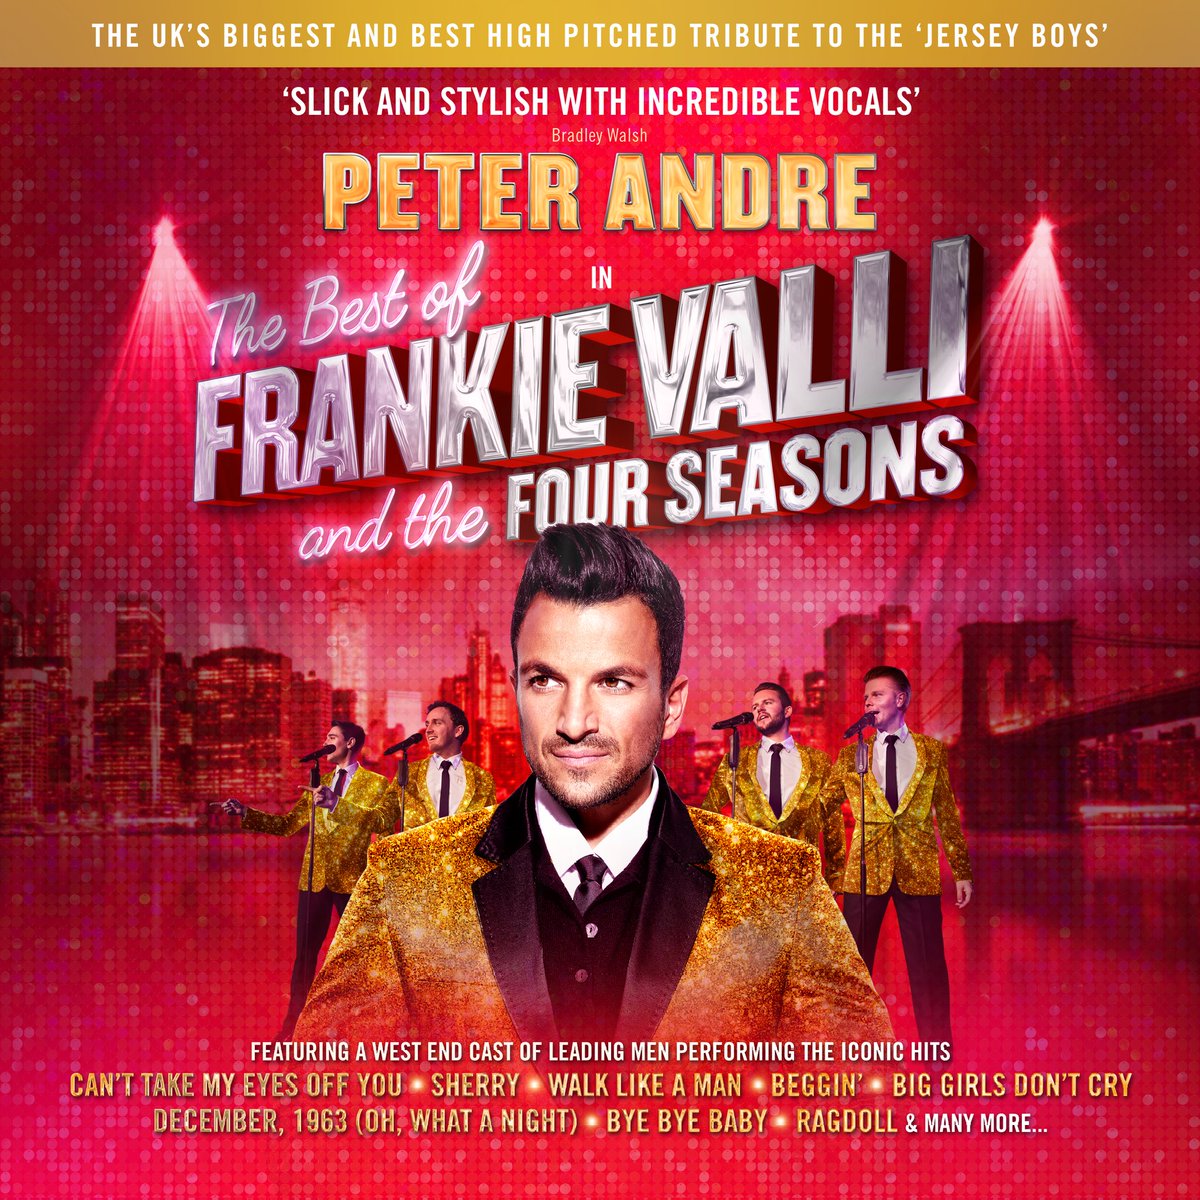 The best of Frankie Valli and the Four Seasons will be celebrated in major new tour @FourSeasonsShow. @MrPeterAndre will star alongside a supporting cast when the tour kicks off on 14th January. Full dates and tickets from fourseasonsshow.com